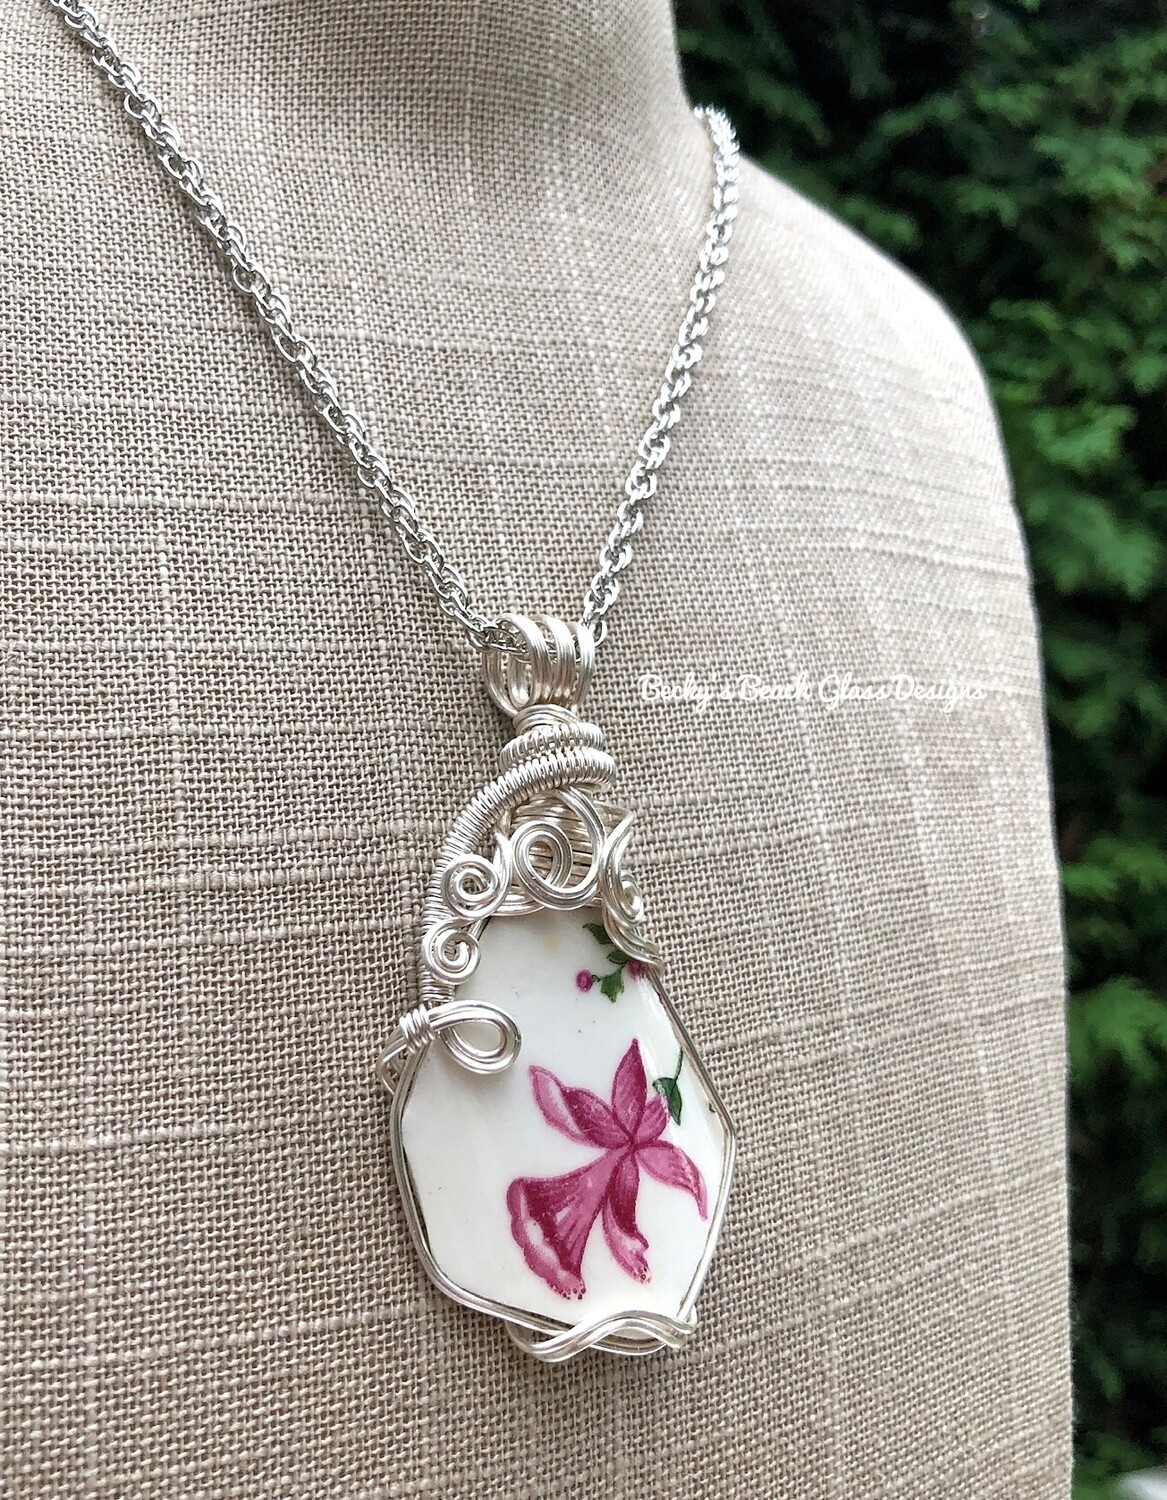 English Floral Sea Pottery Necklace